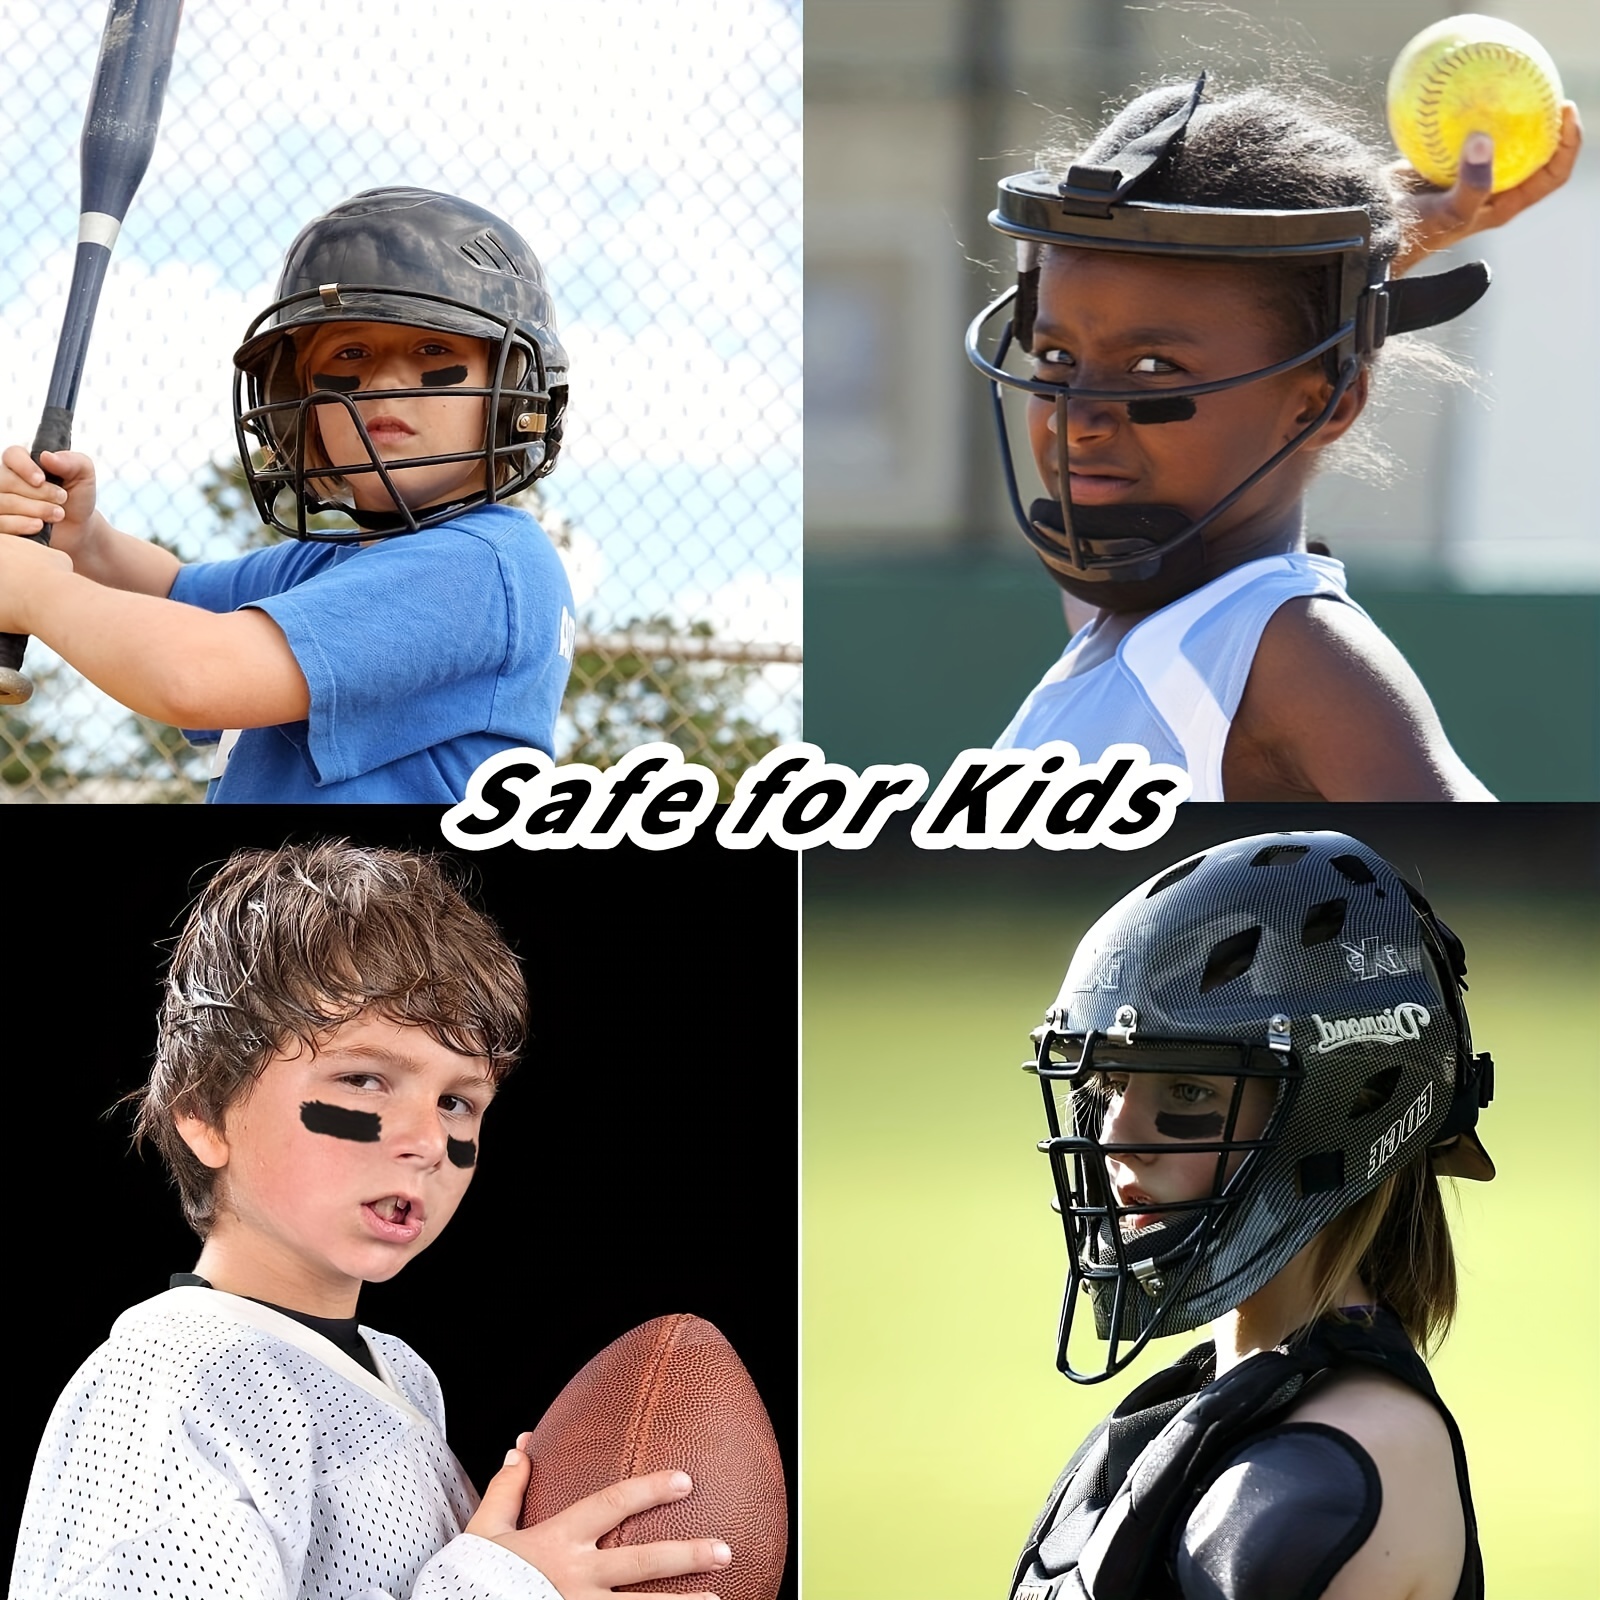 Eye Black Stick for Sports,Easy to Color Black Face Paint,Eye